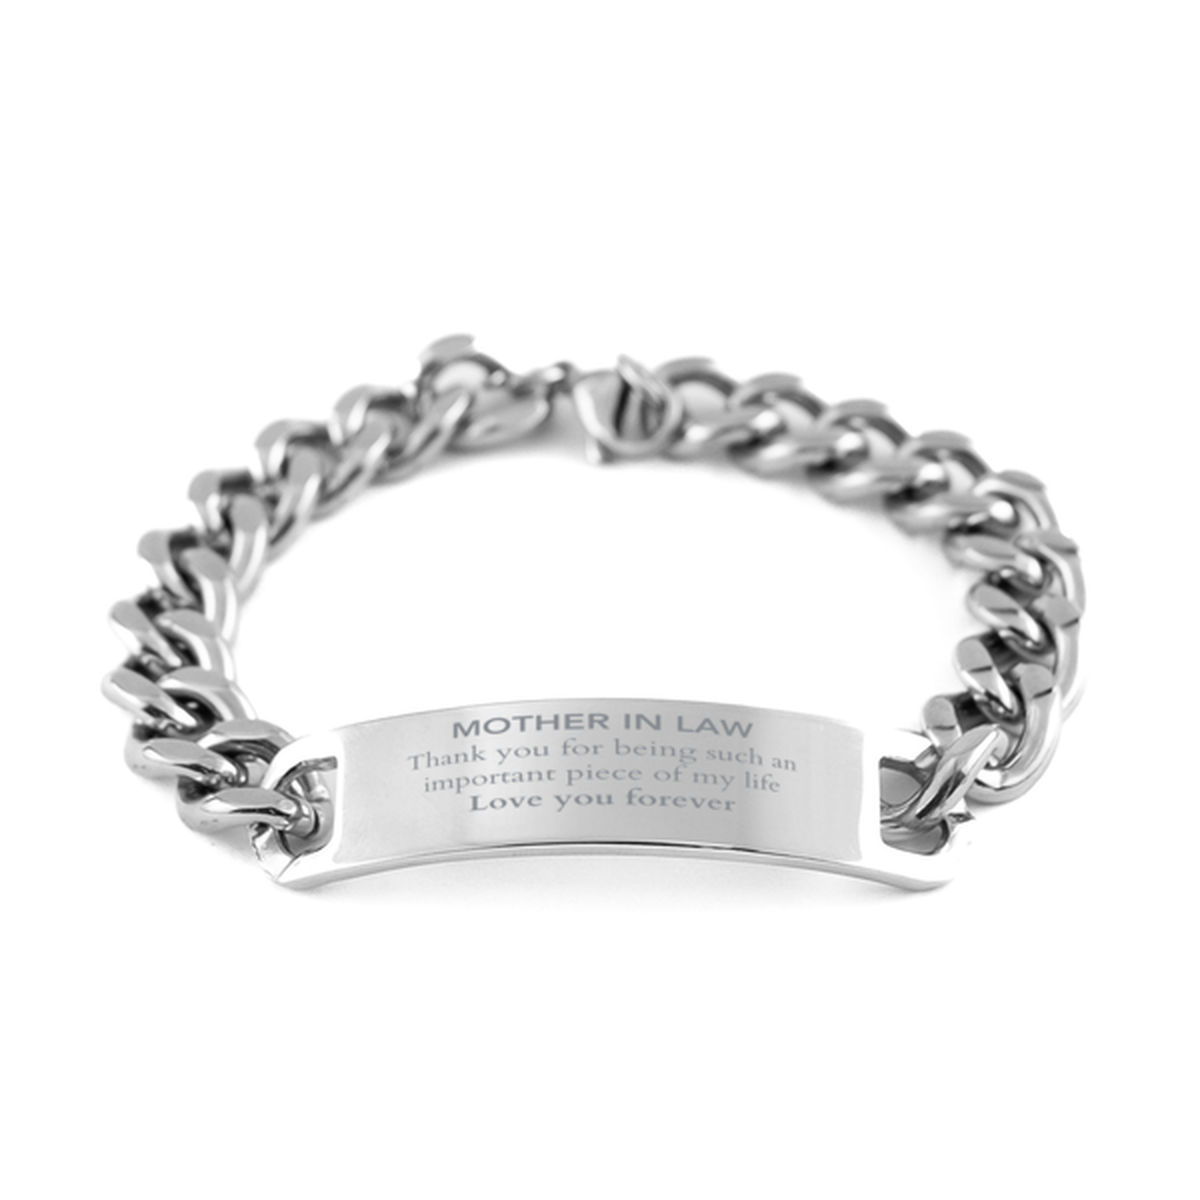 Appropriate Mother In Law Cuban Chain Stainless Steel Bracelet Epic Birthday Gifts for Mother In Law Thank you for being such an important piece of my life Mother In Law Christmas Mothers Fathers Day